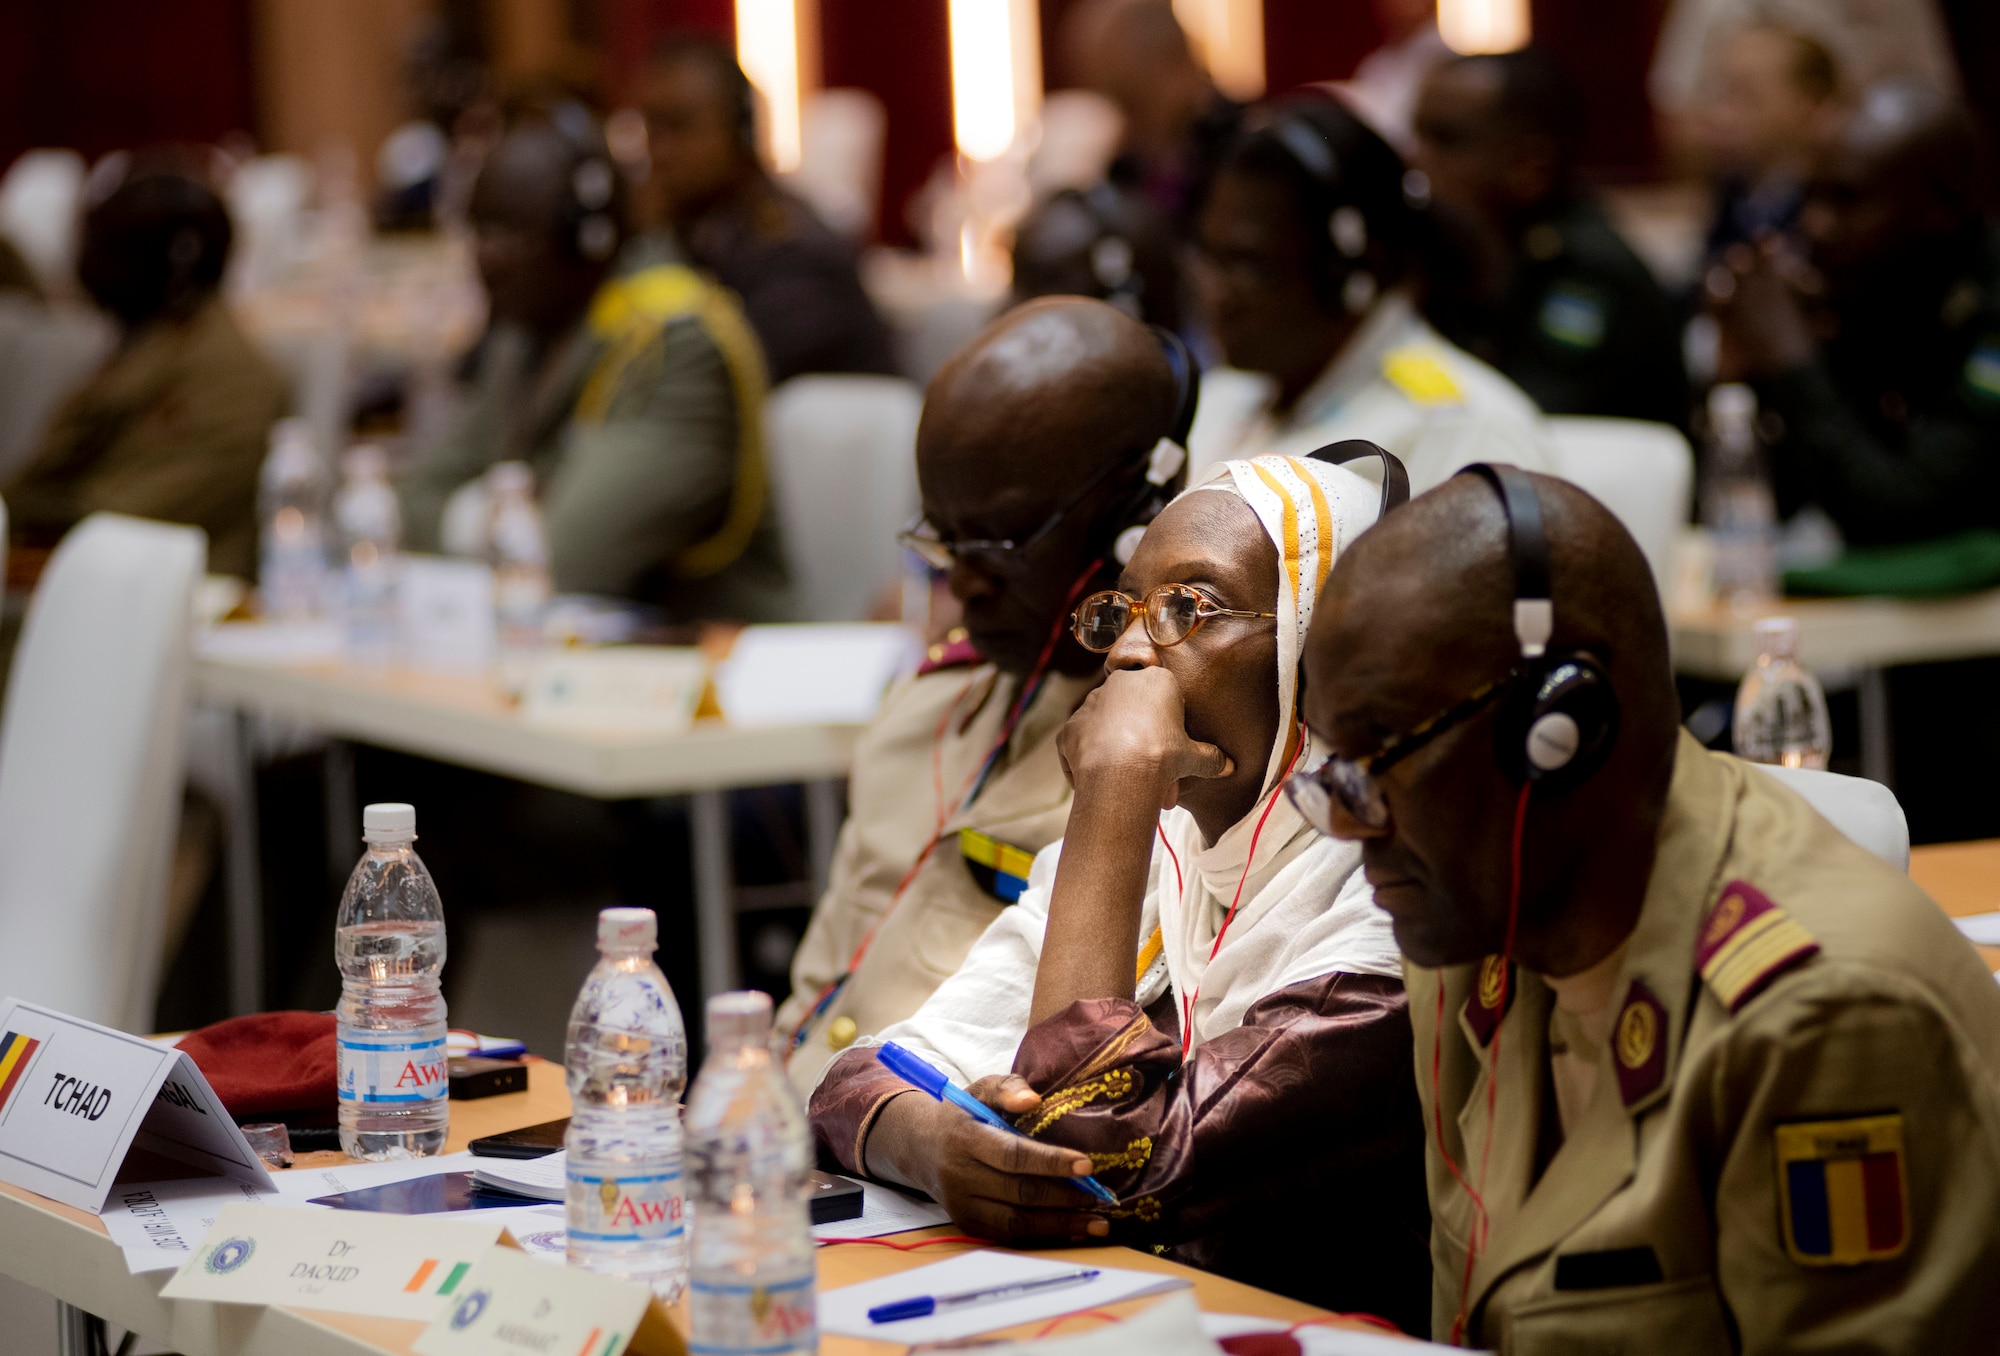 Dr. Saada Daoud, a representative from Chad, listens to a key note speak from the U.S. Center for Disease Control during the African Partner Outbreak Response Alliance (APORA) conference, Abidjan, Côte d'Ivoire, Nov. 18, 2019.